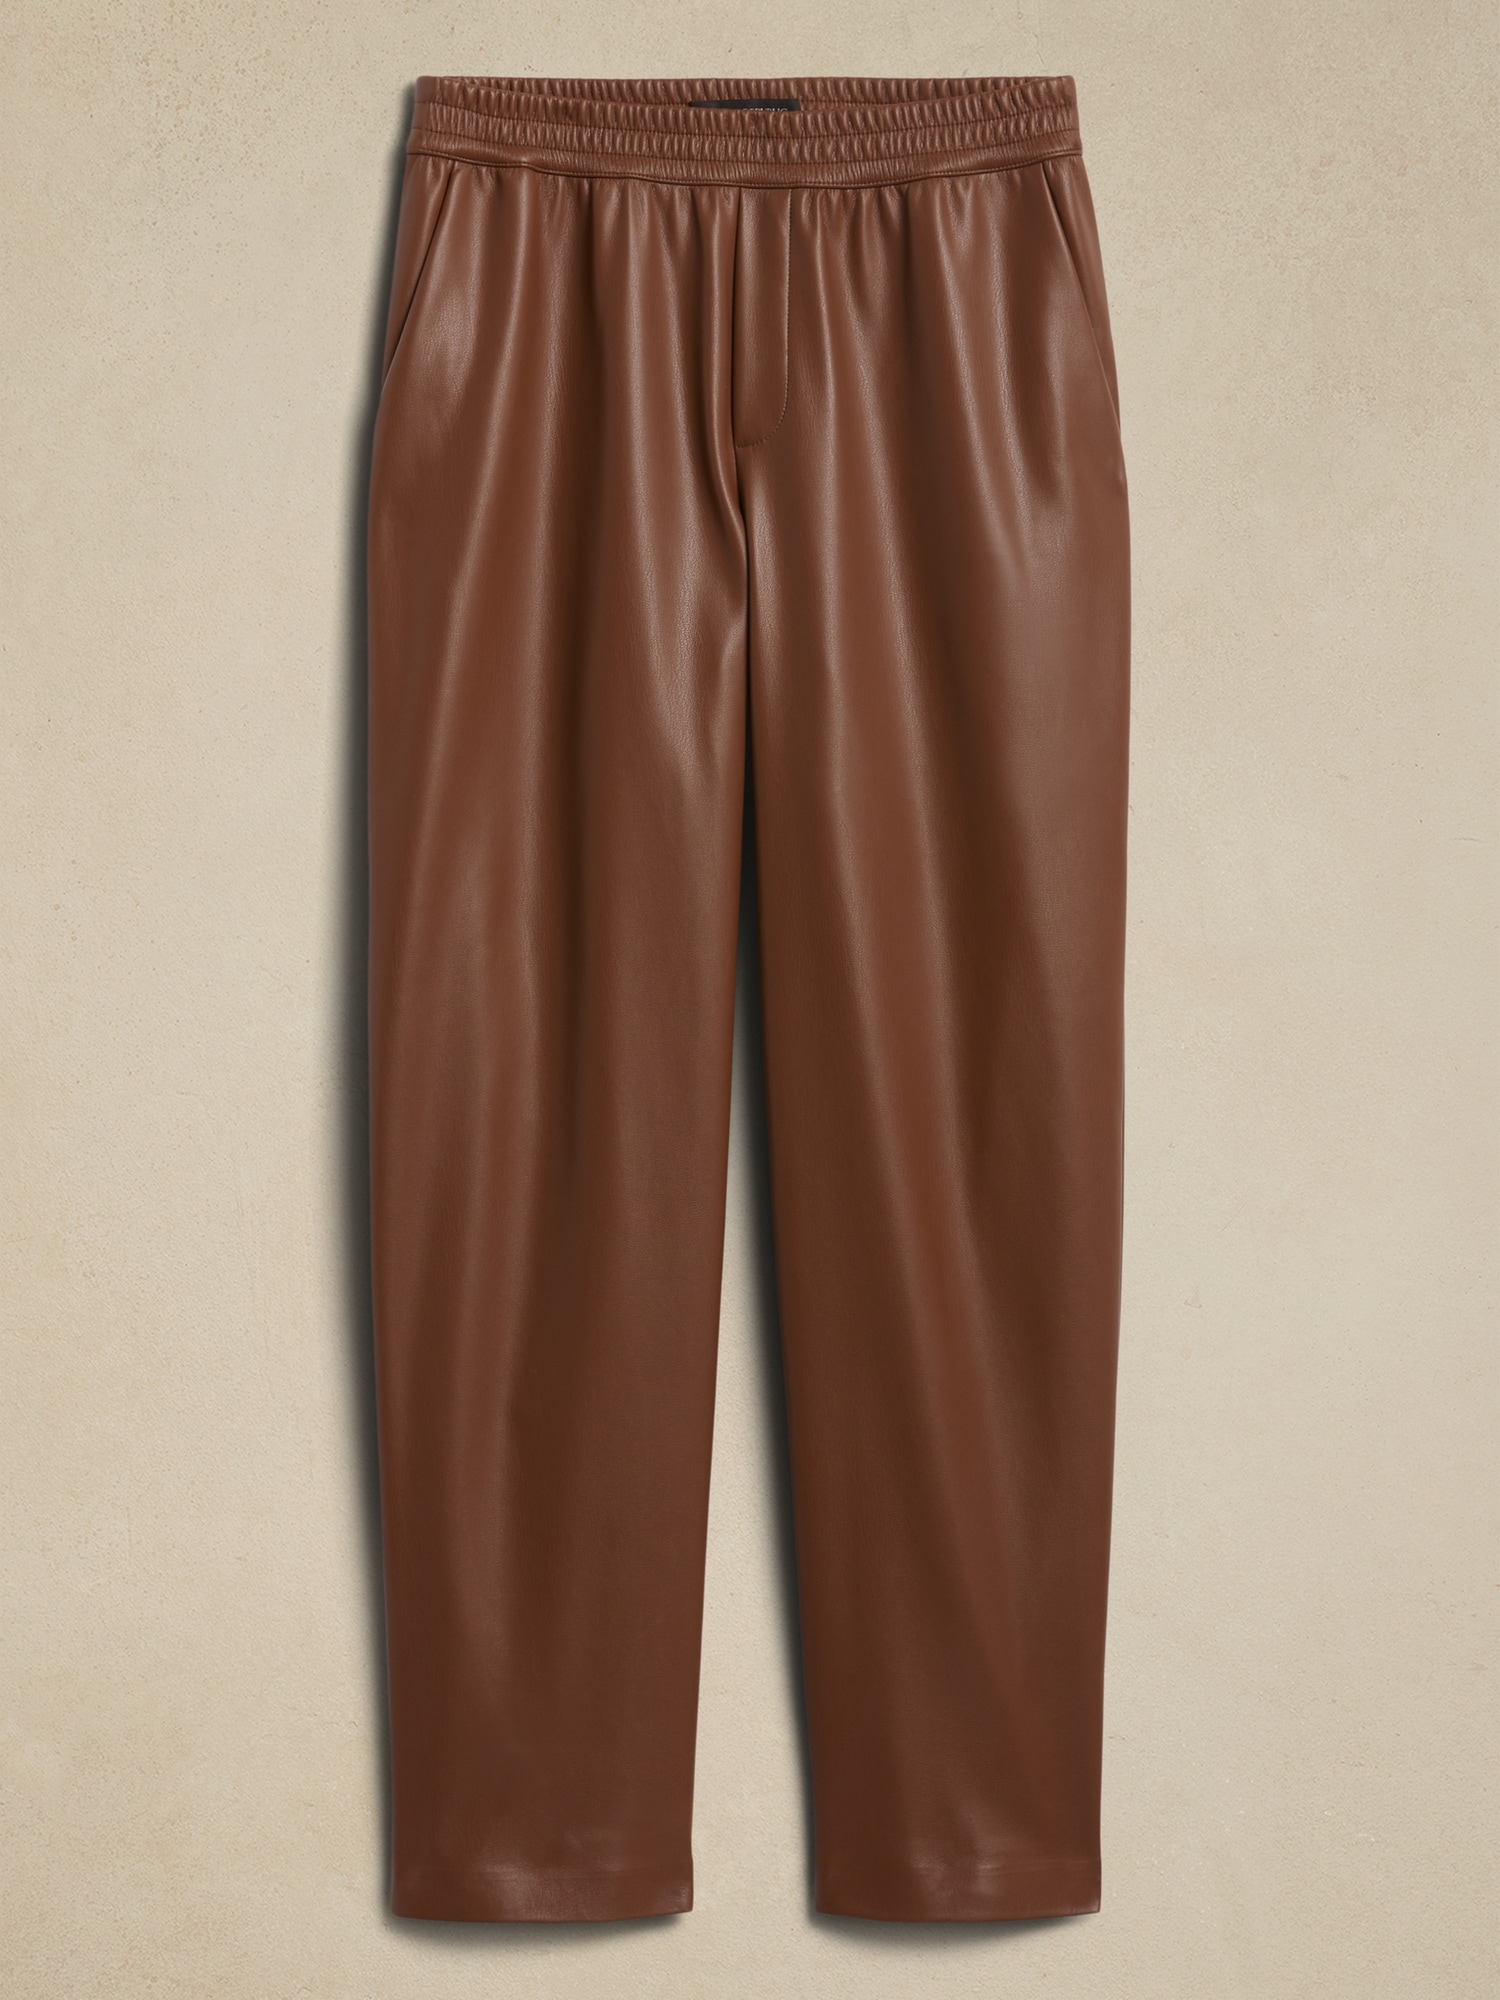 Y2K banana republic softest leather pants…perfect rise/boot cut Size 0/1  Still available 🔥🔥🔥